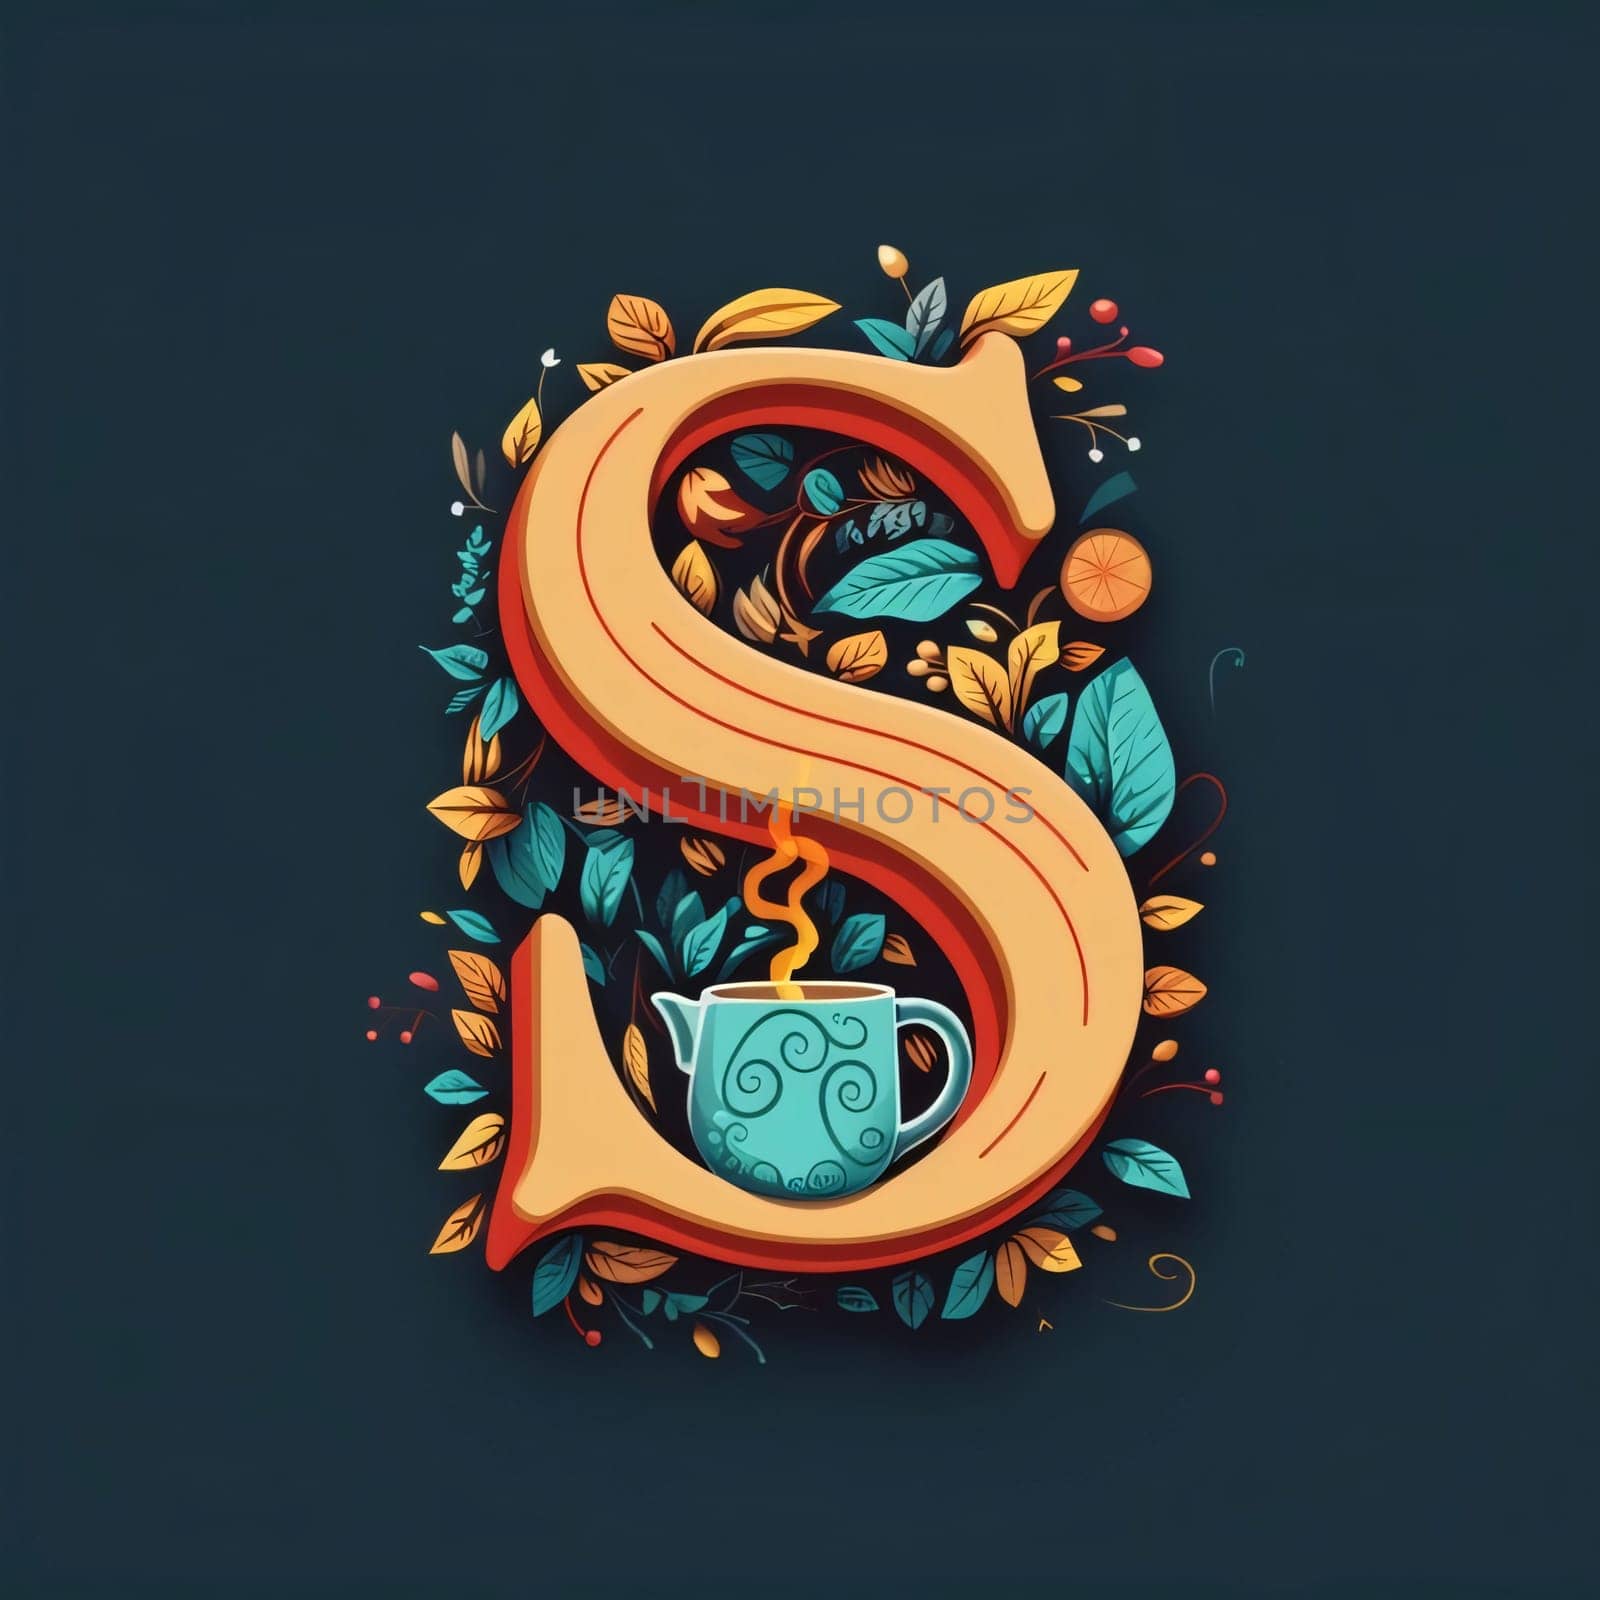 Graphic alphabet letters: Alphabet letter S with cup of coffee and autumn leaves. Vector illustration.